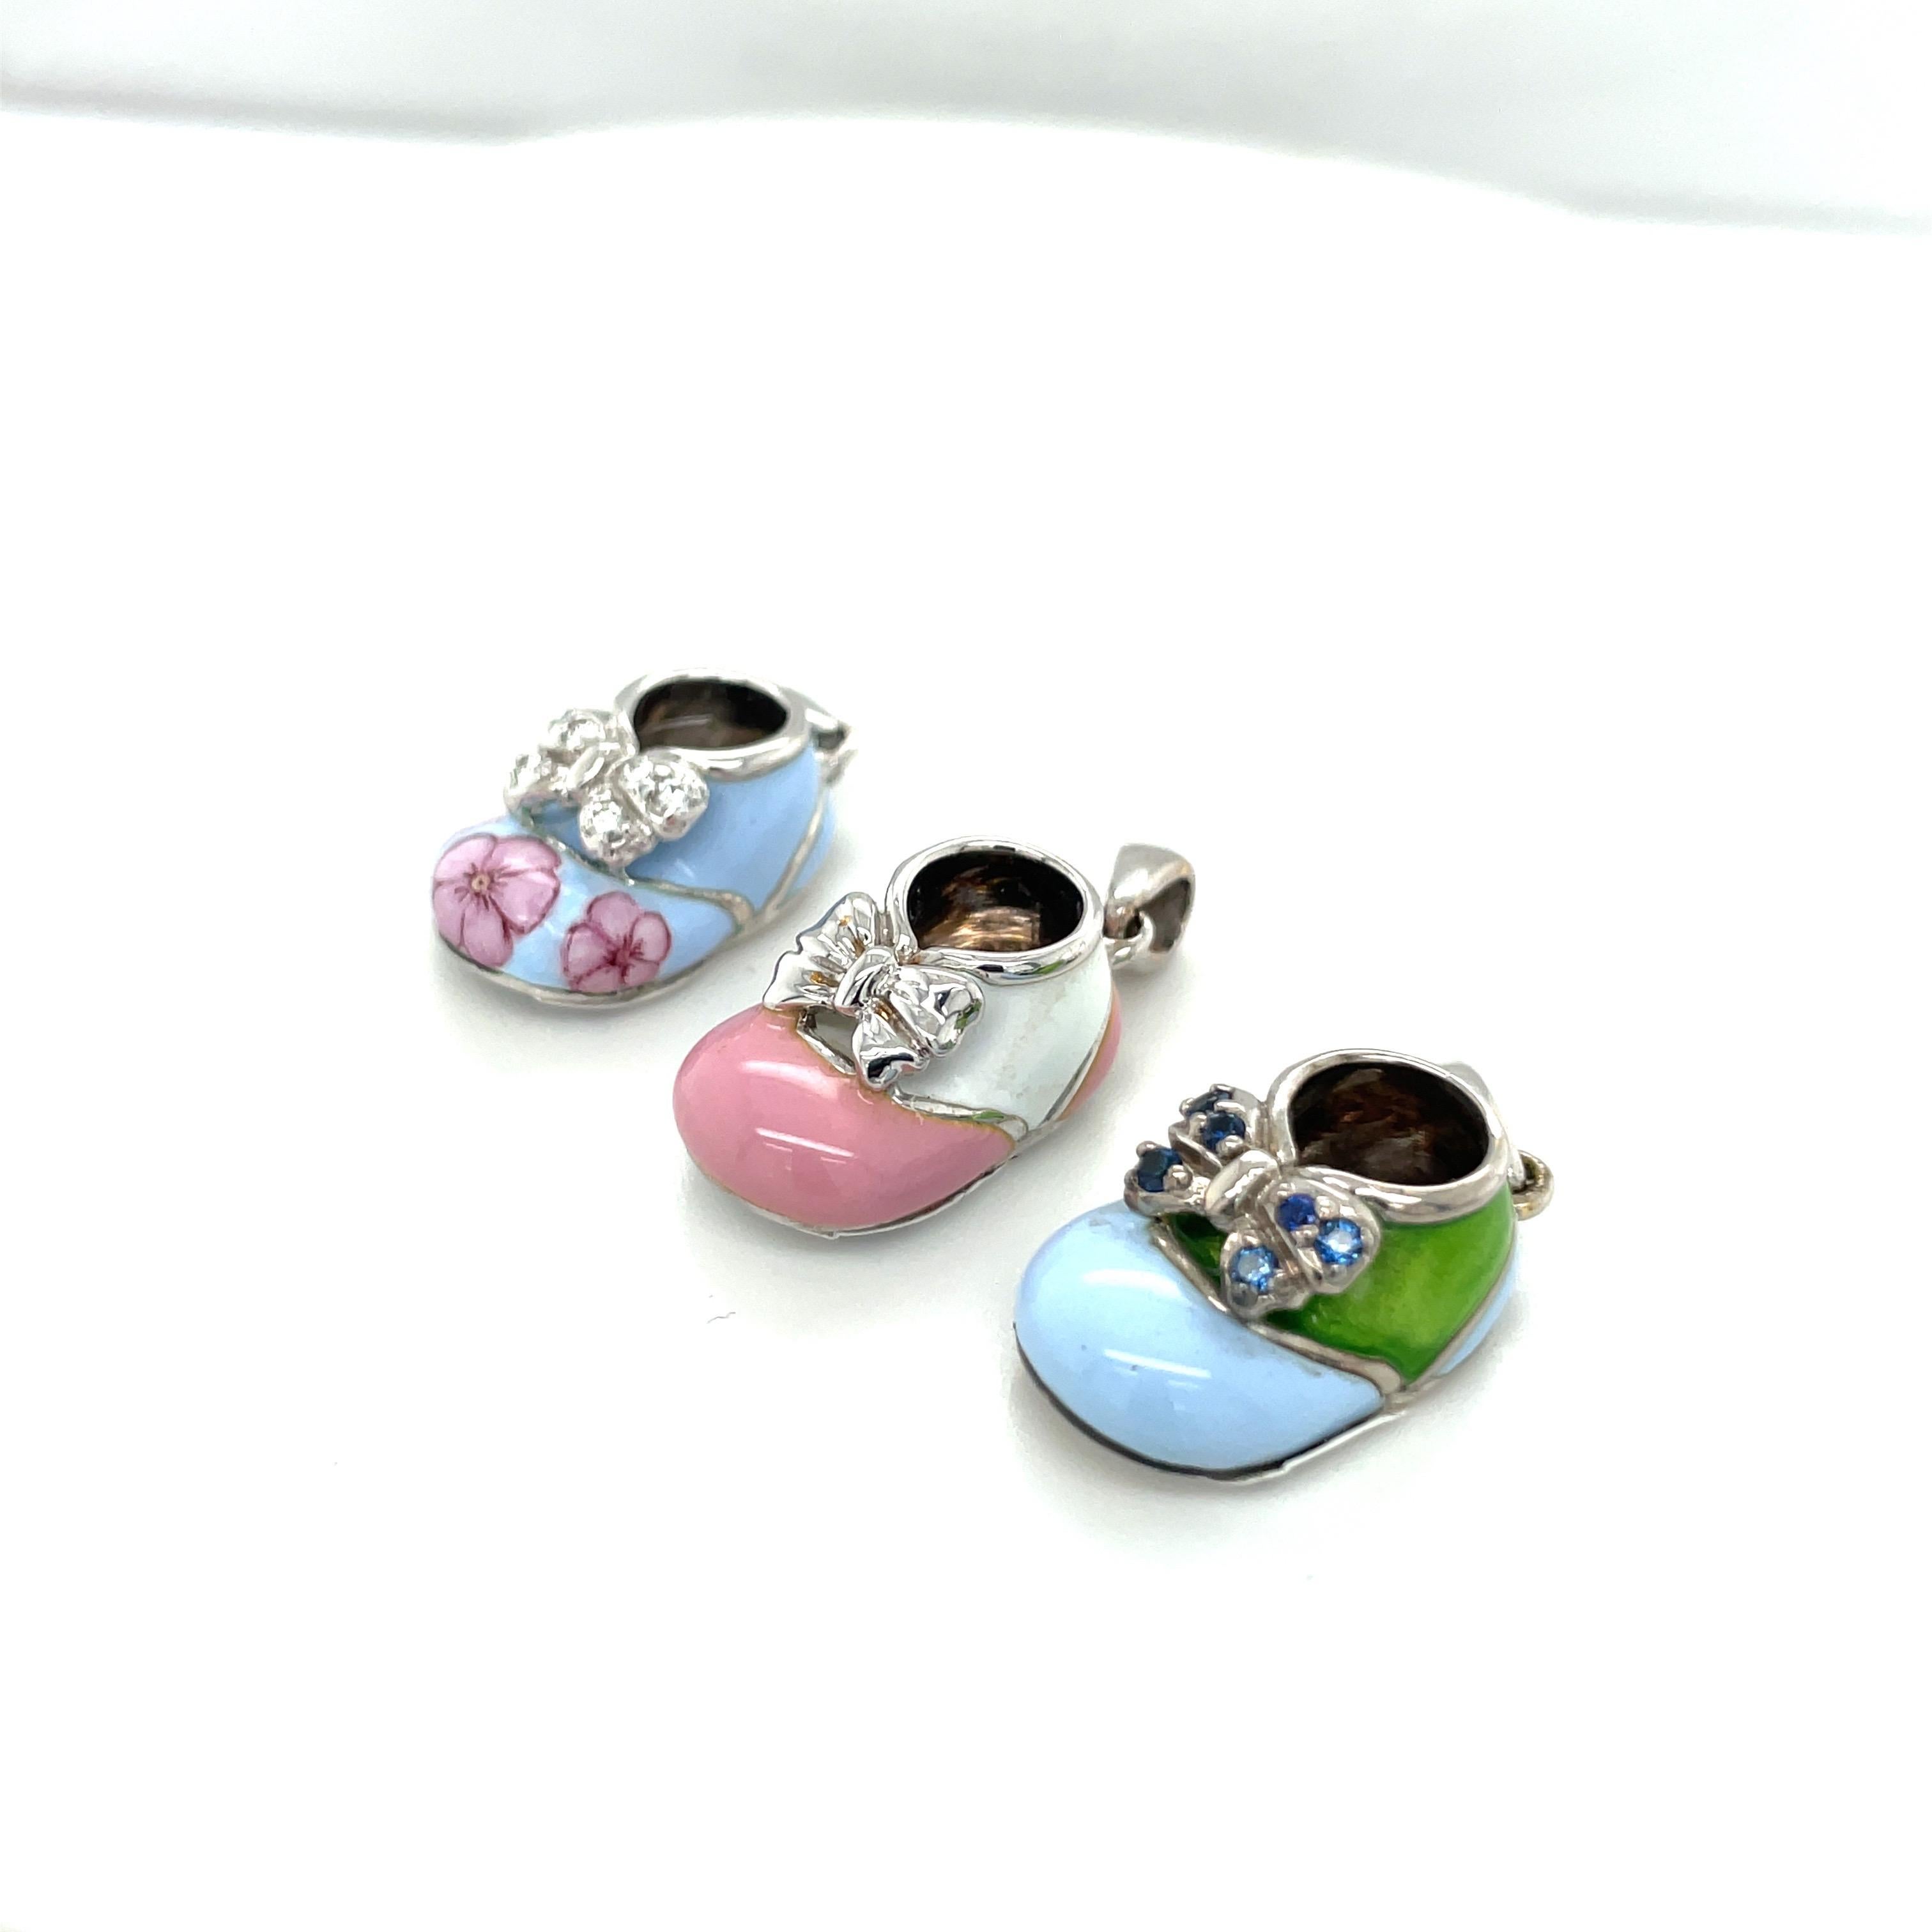 Modern 18KT WG Baby Shoe Charm 0.12Ct Diamond Light Blue and Pink Enamel with Bow